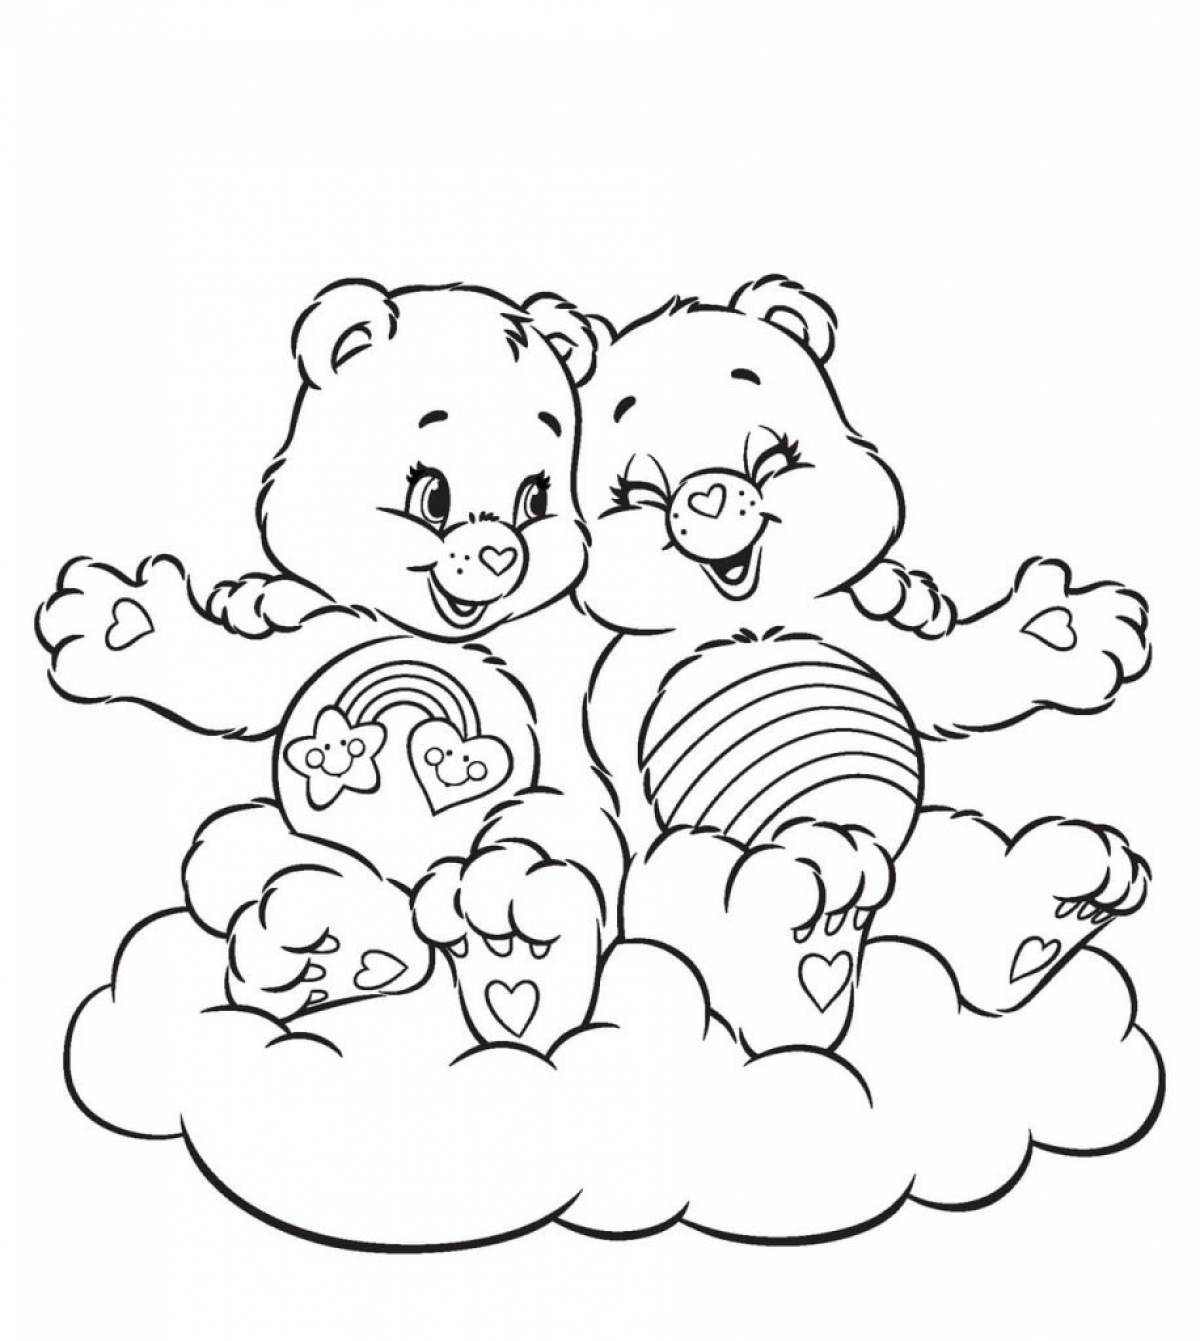 Gorgeous bear and rabbit coloring page